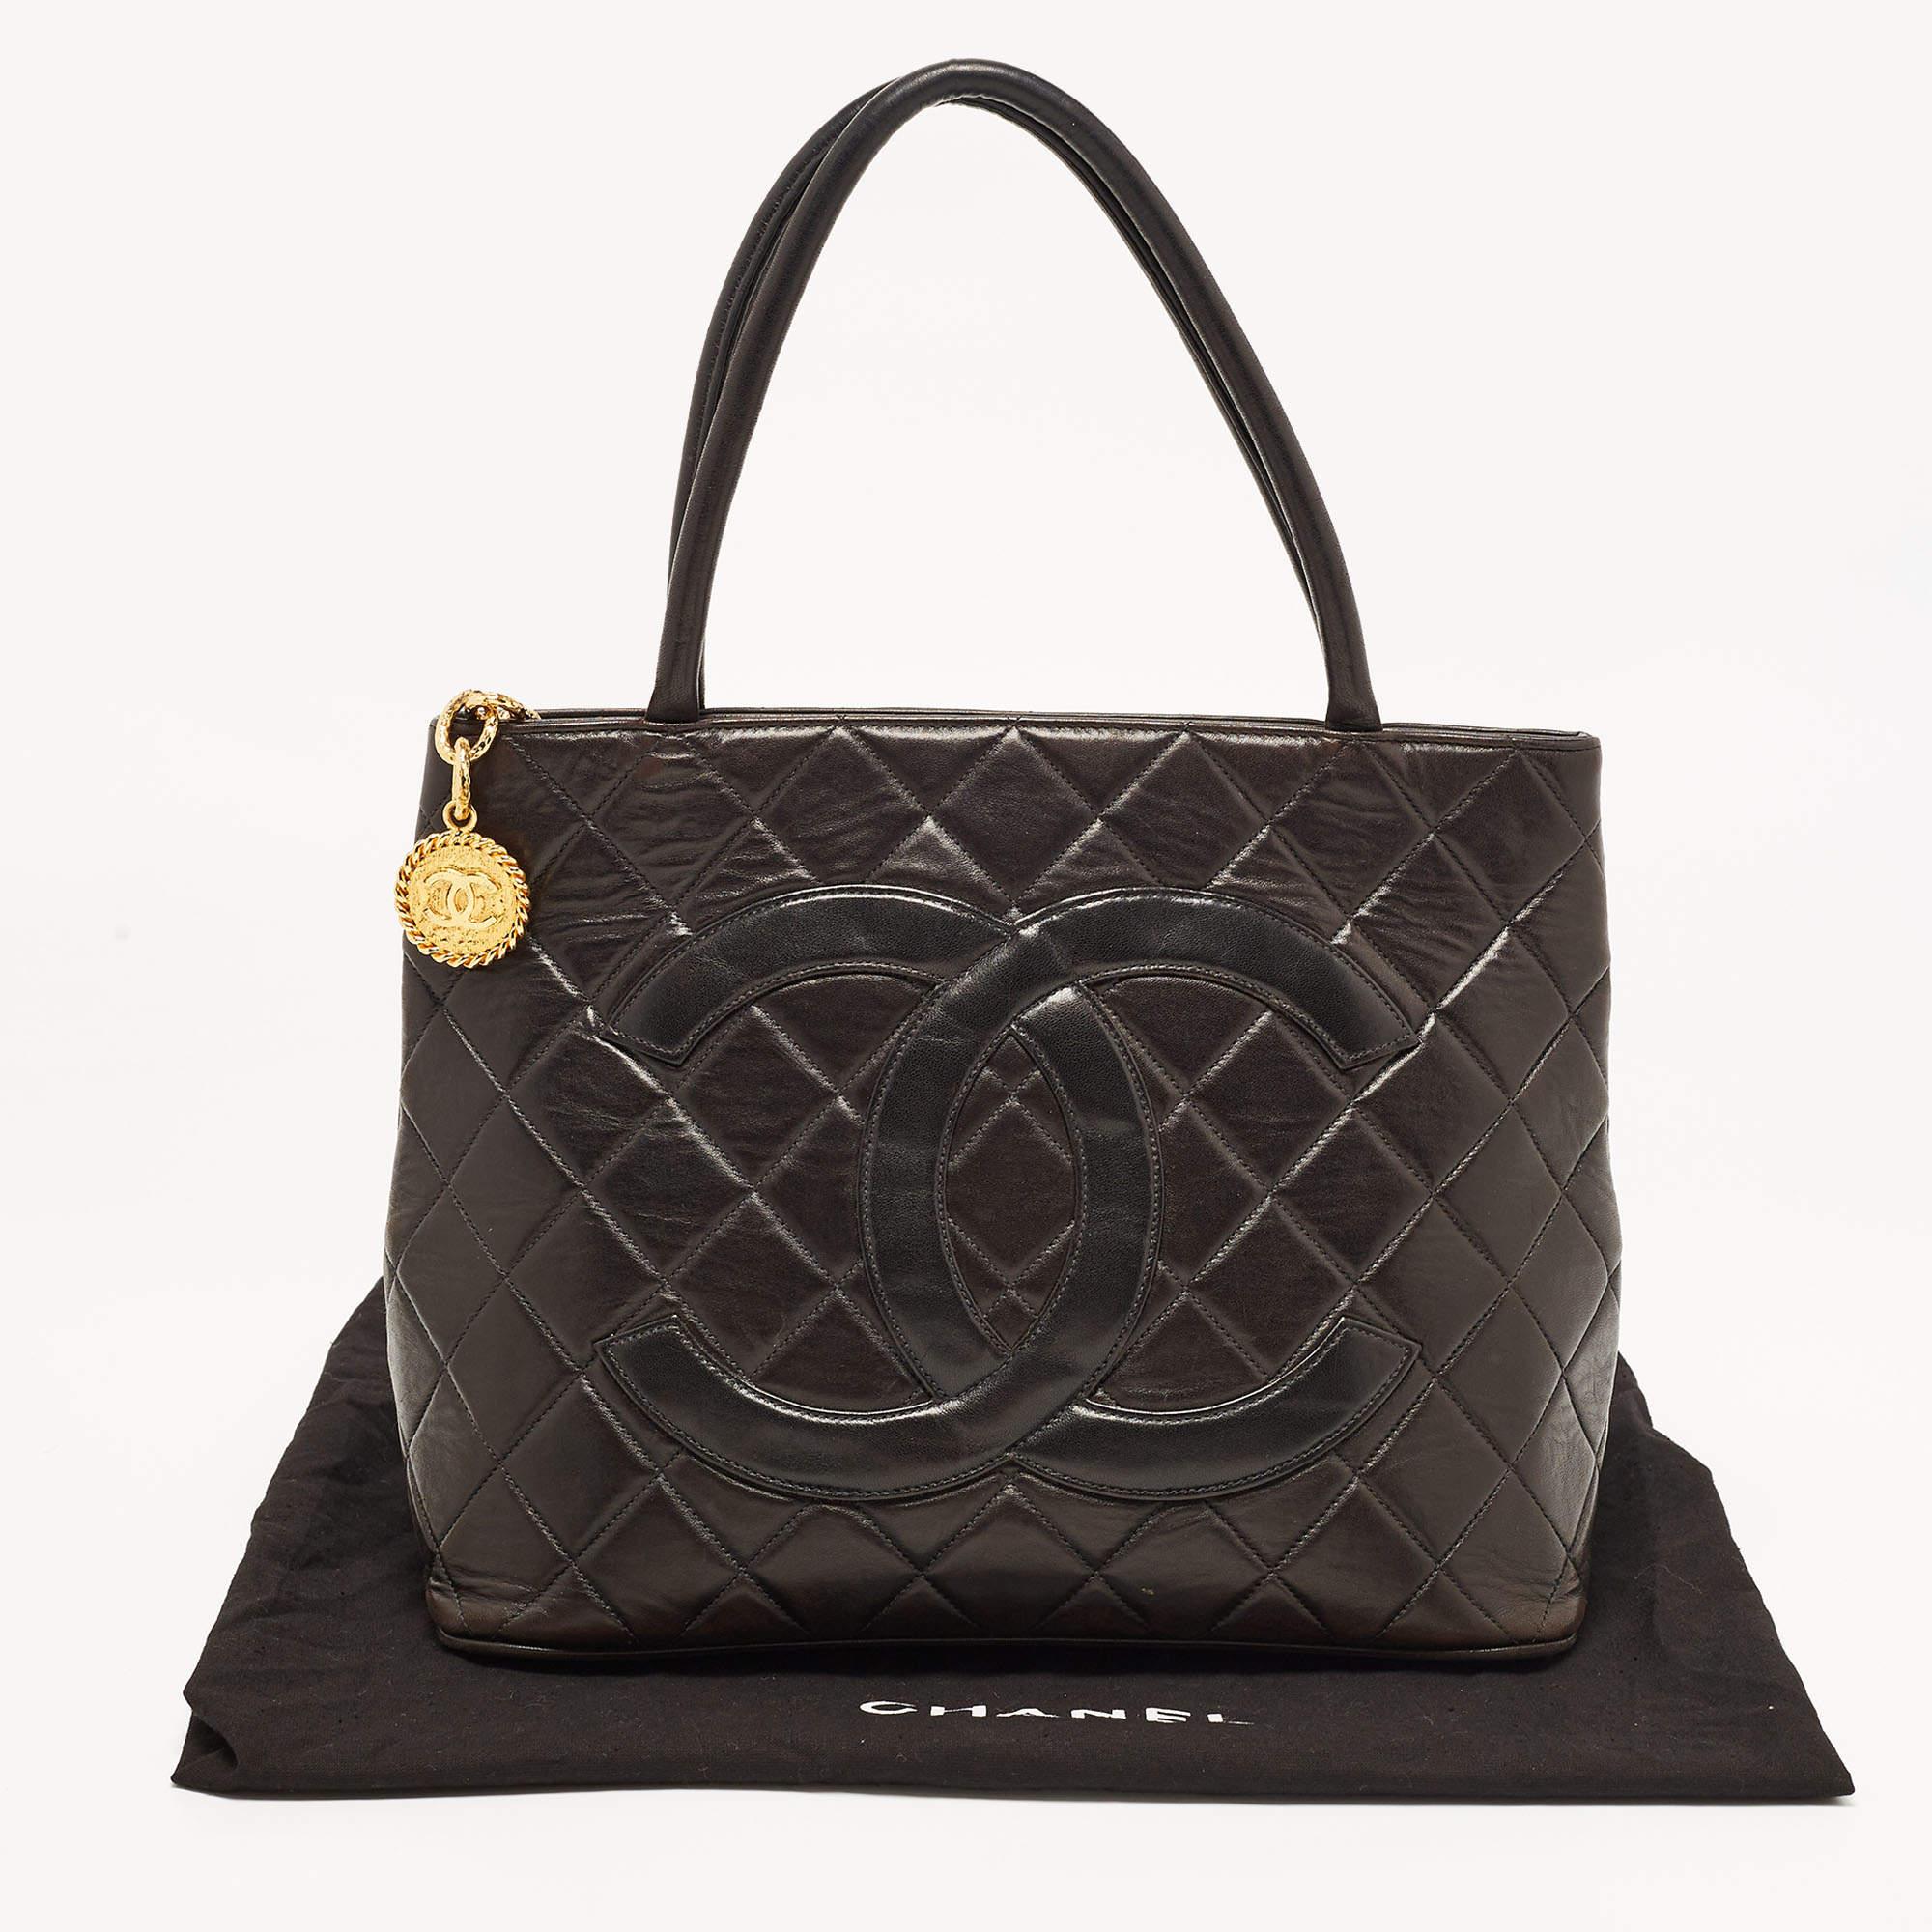 Chanel Black Quilted Leather Medallion Tote 16